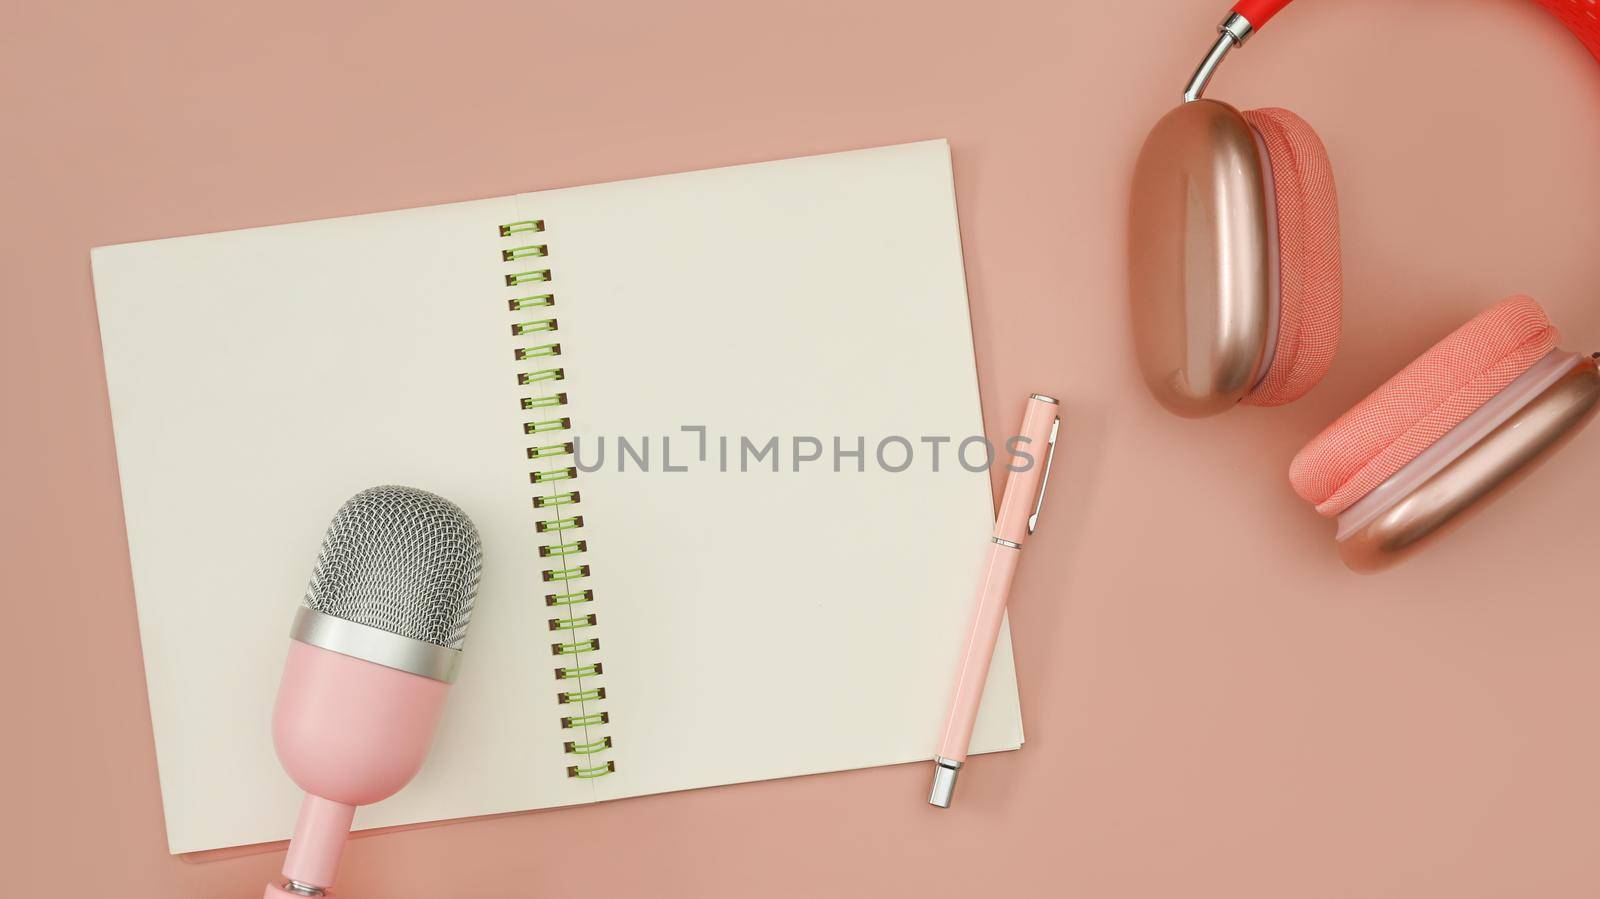 Blank notebook, microphone for podcasts and wireless headphones on pink background.